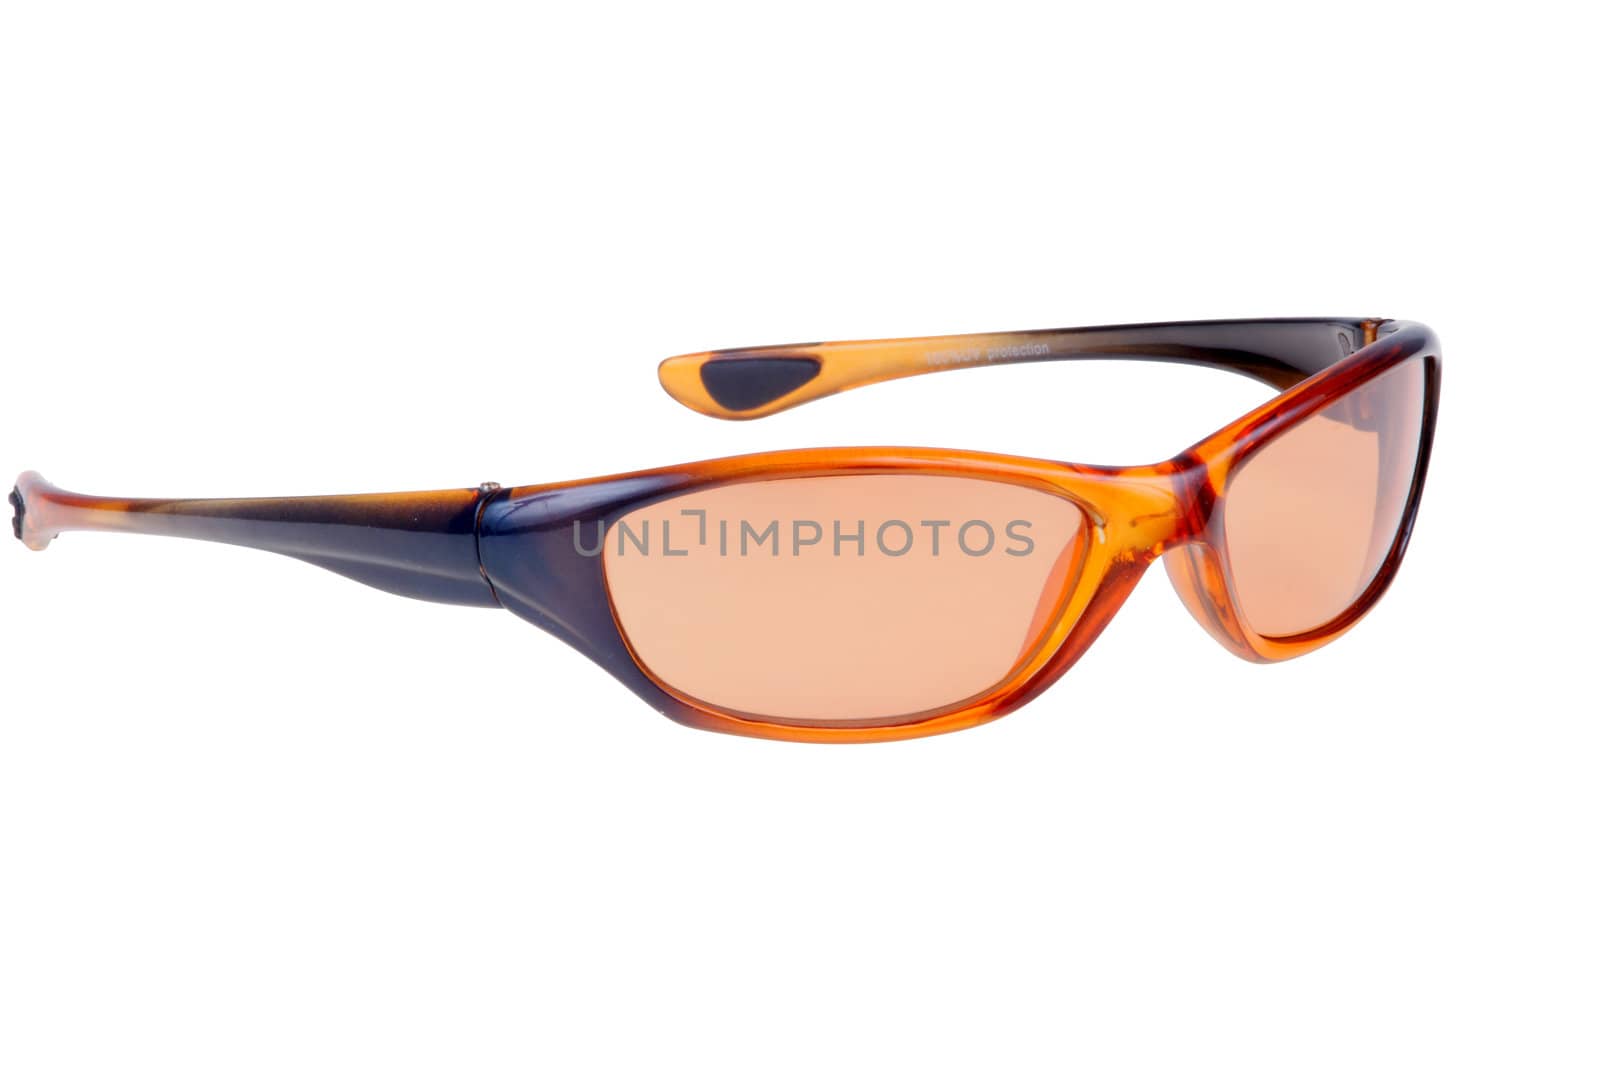 Modern Sunglasses closeup with clipping path over white